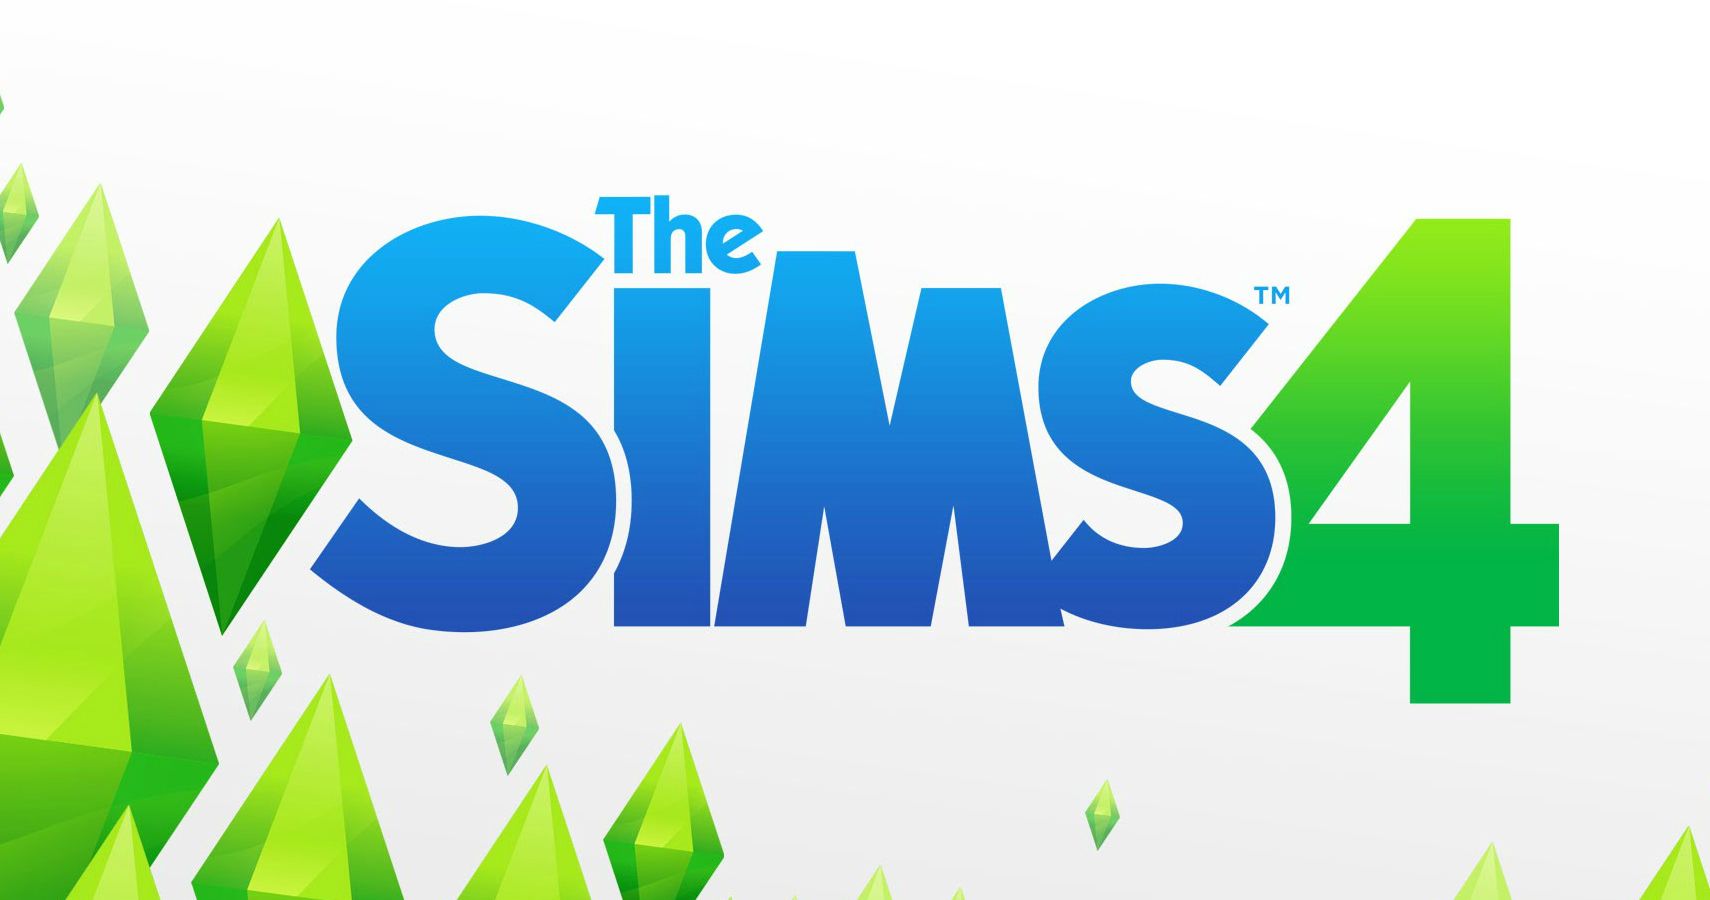 Sims 4 Cover